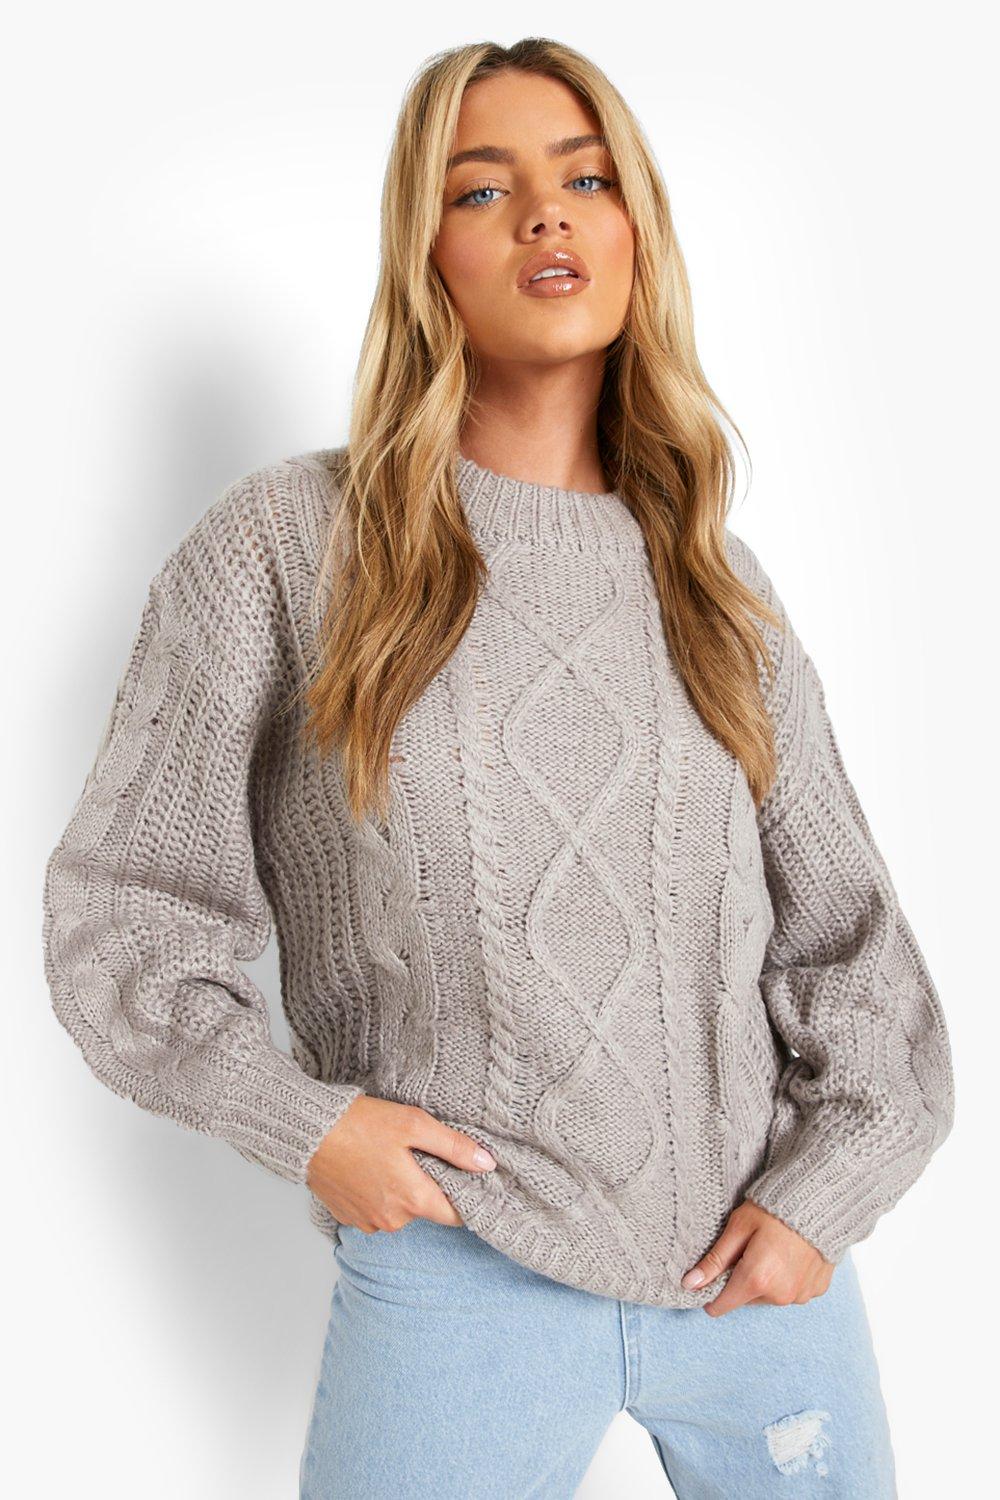 Clothing & Shoes - Tops - Sweaters & Cardigans - Pullovers